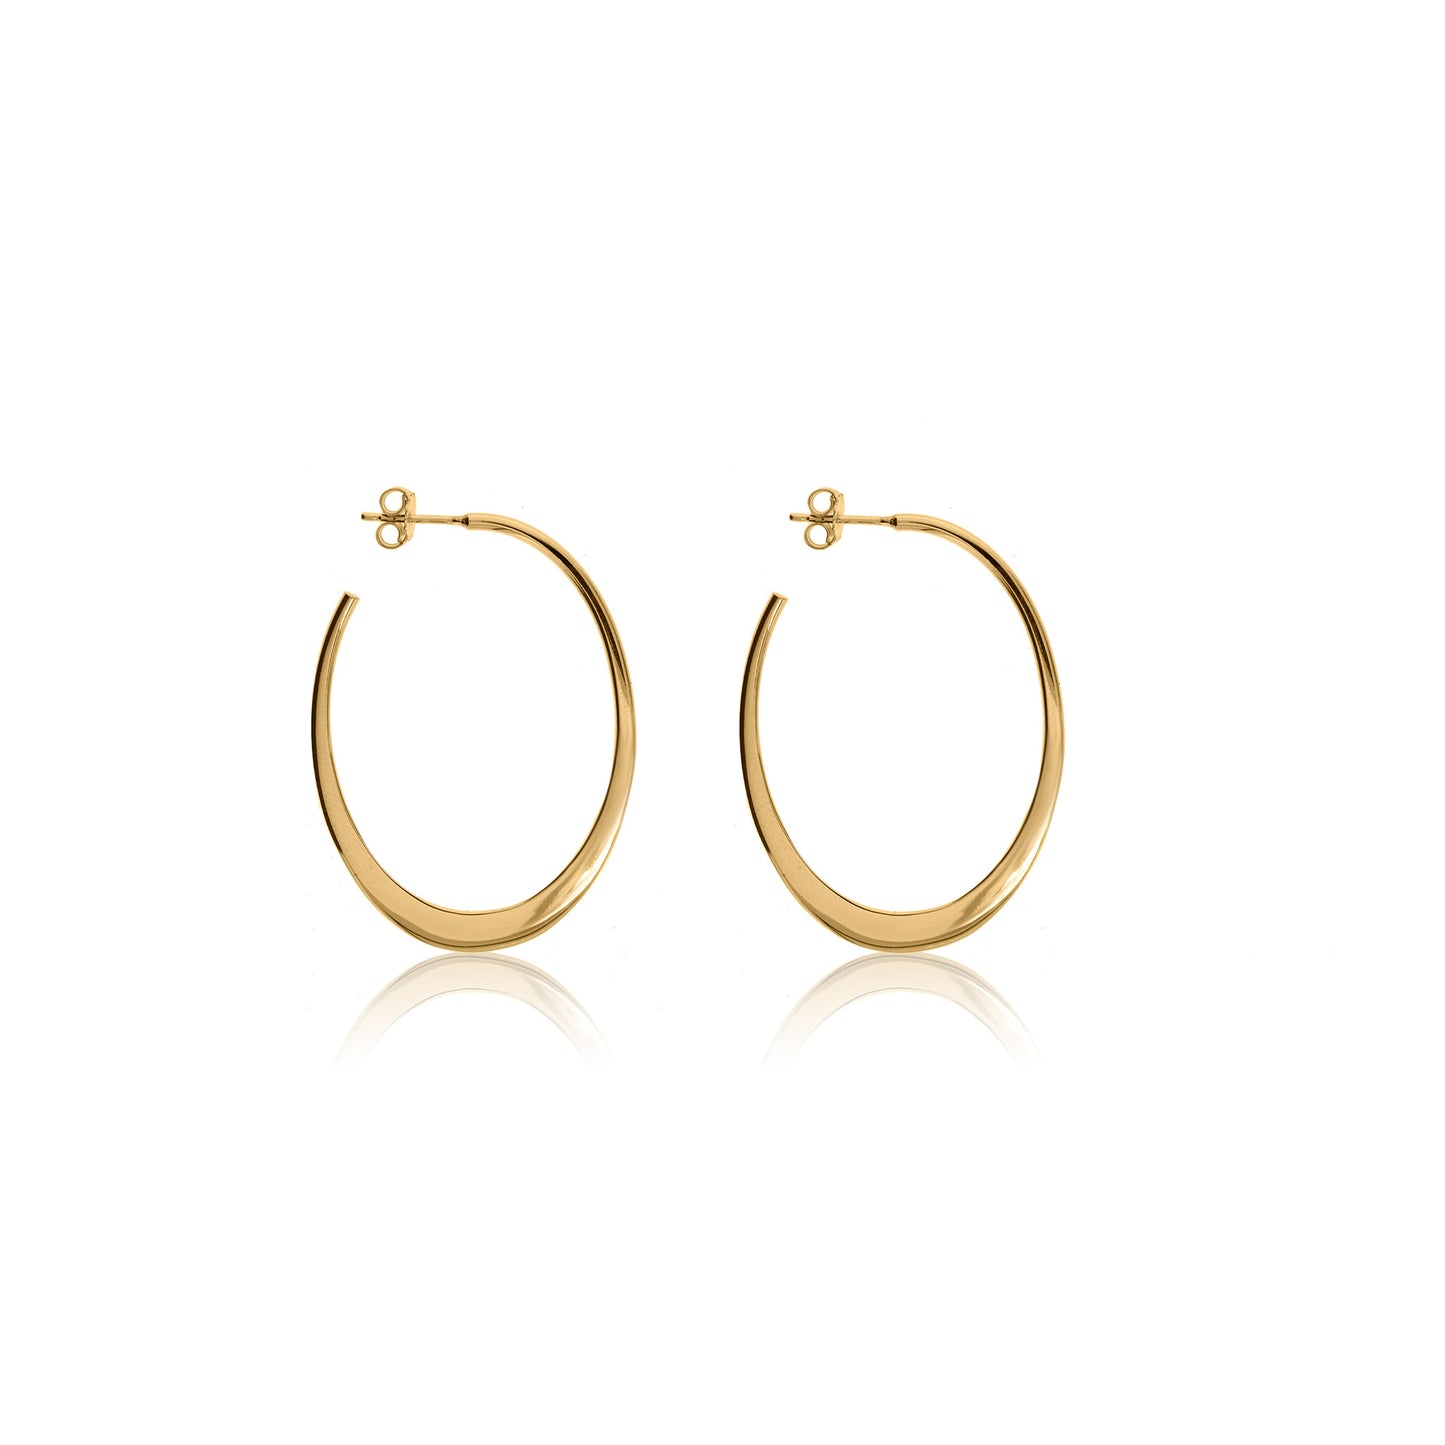 EX-82/G - Gold Plated on Silver Open Hoop Earrings